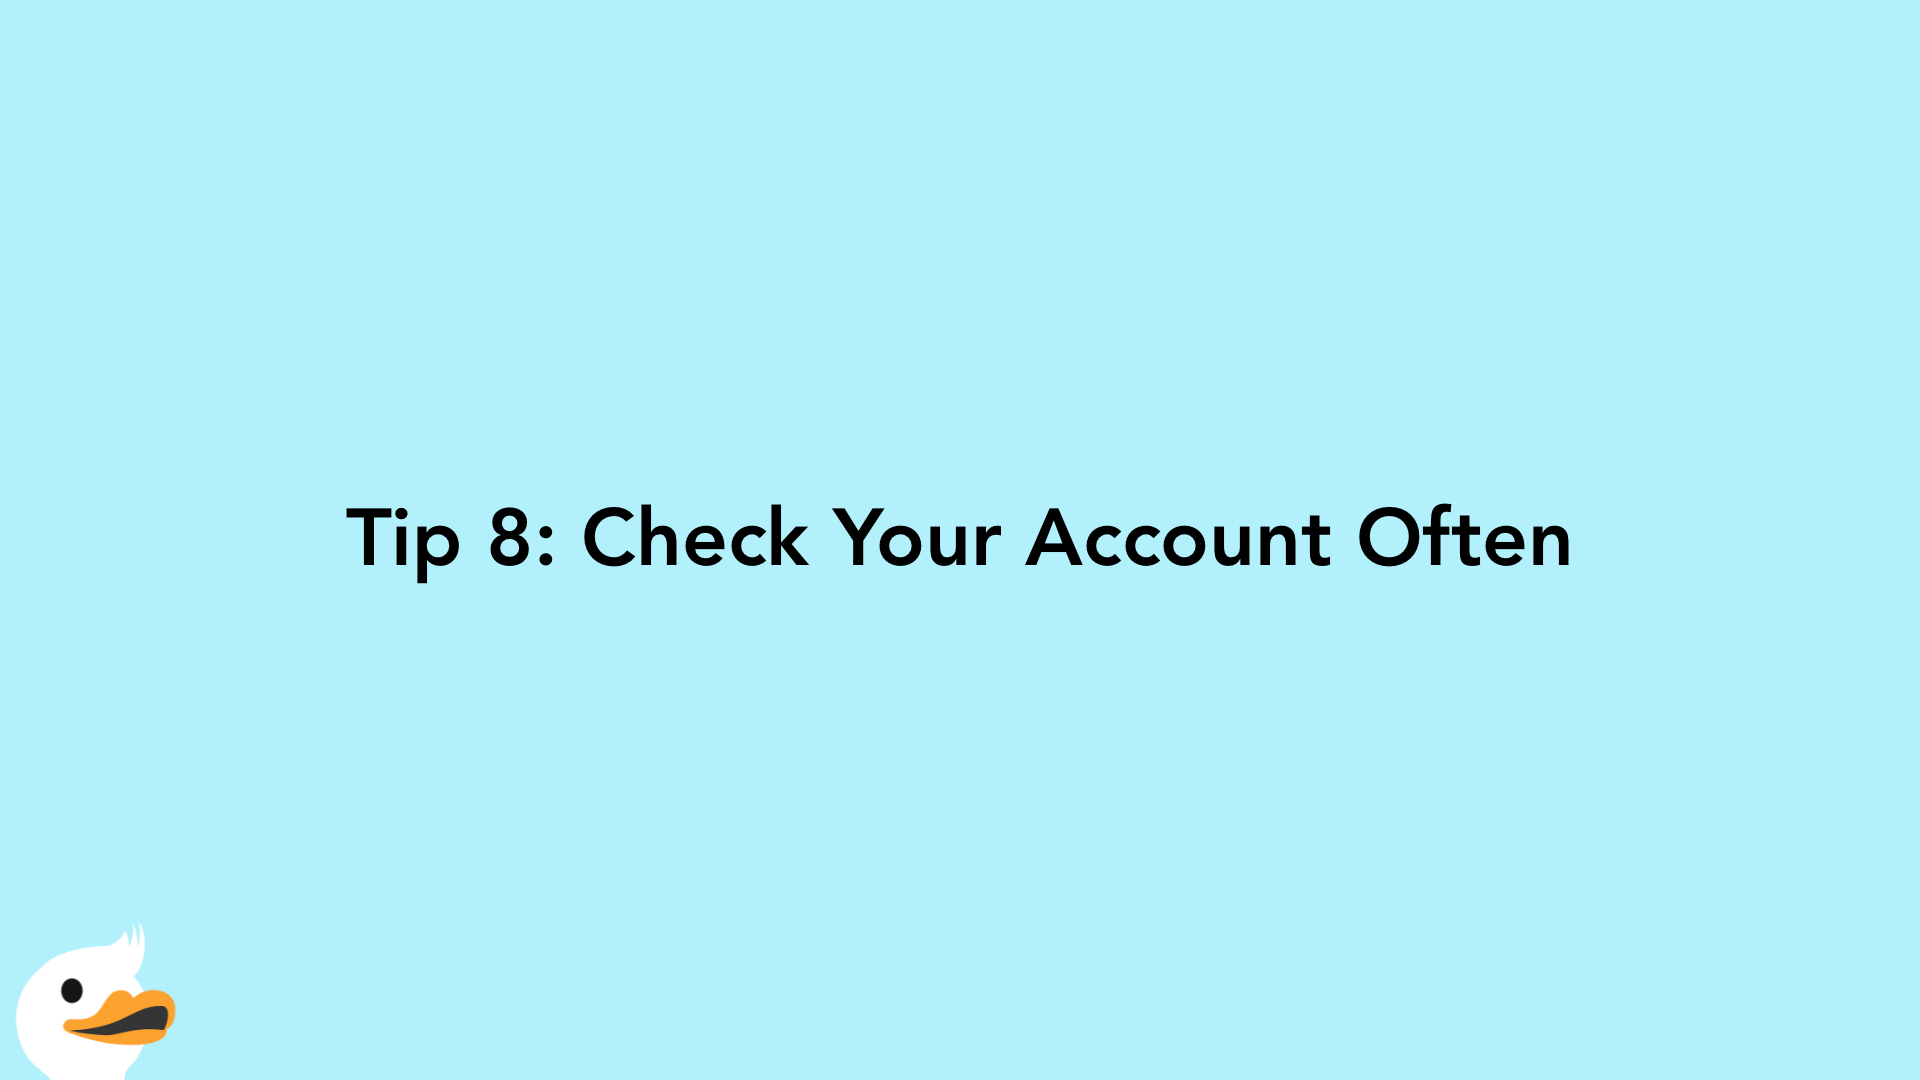 Tip 8: Check Your Account Often